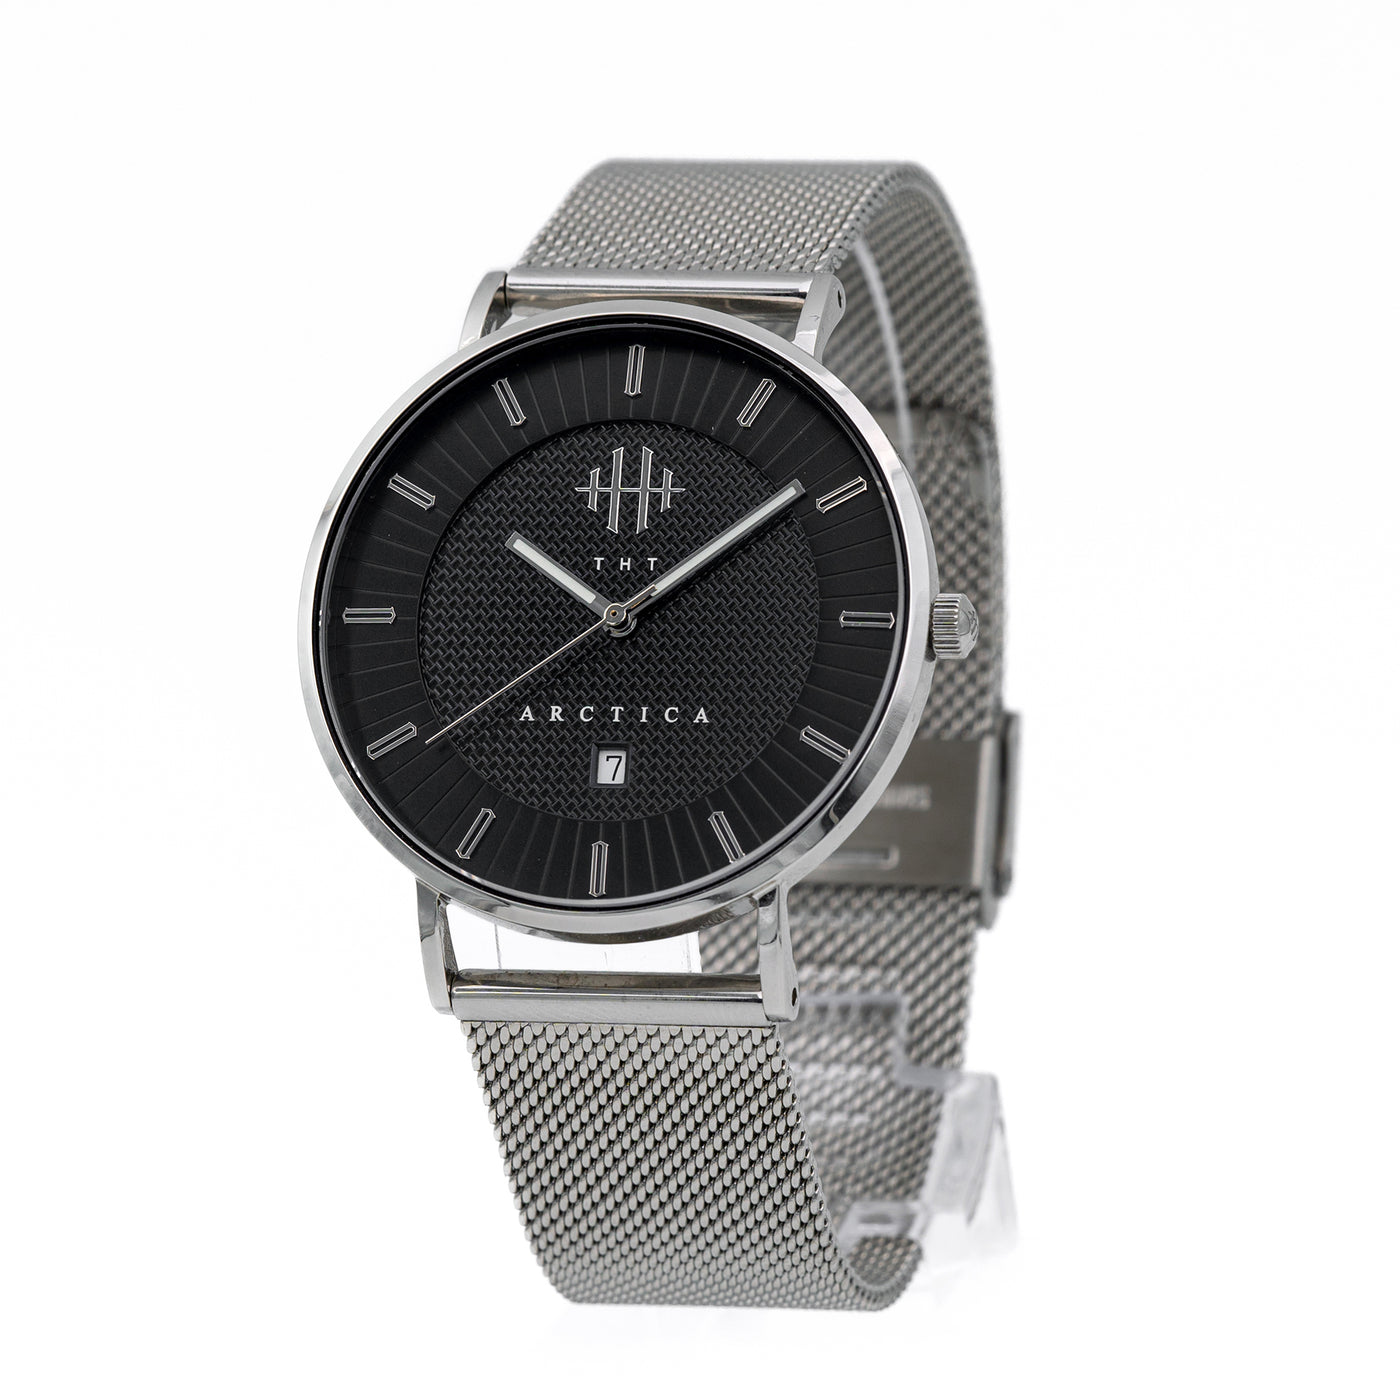 THT Watches Arctica Black Pearl. Black and silver watch with stainless steel mesh band.